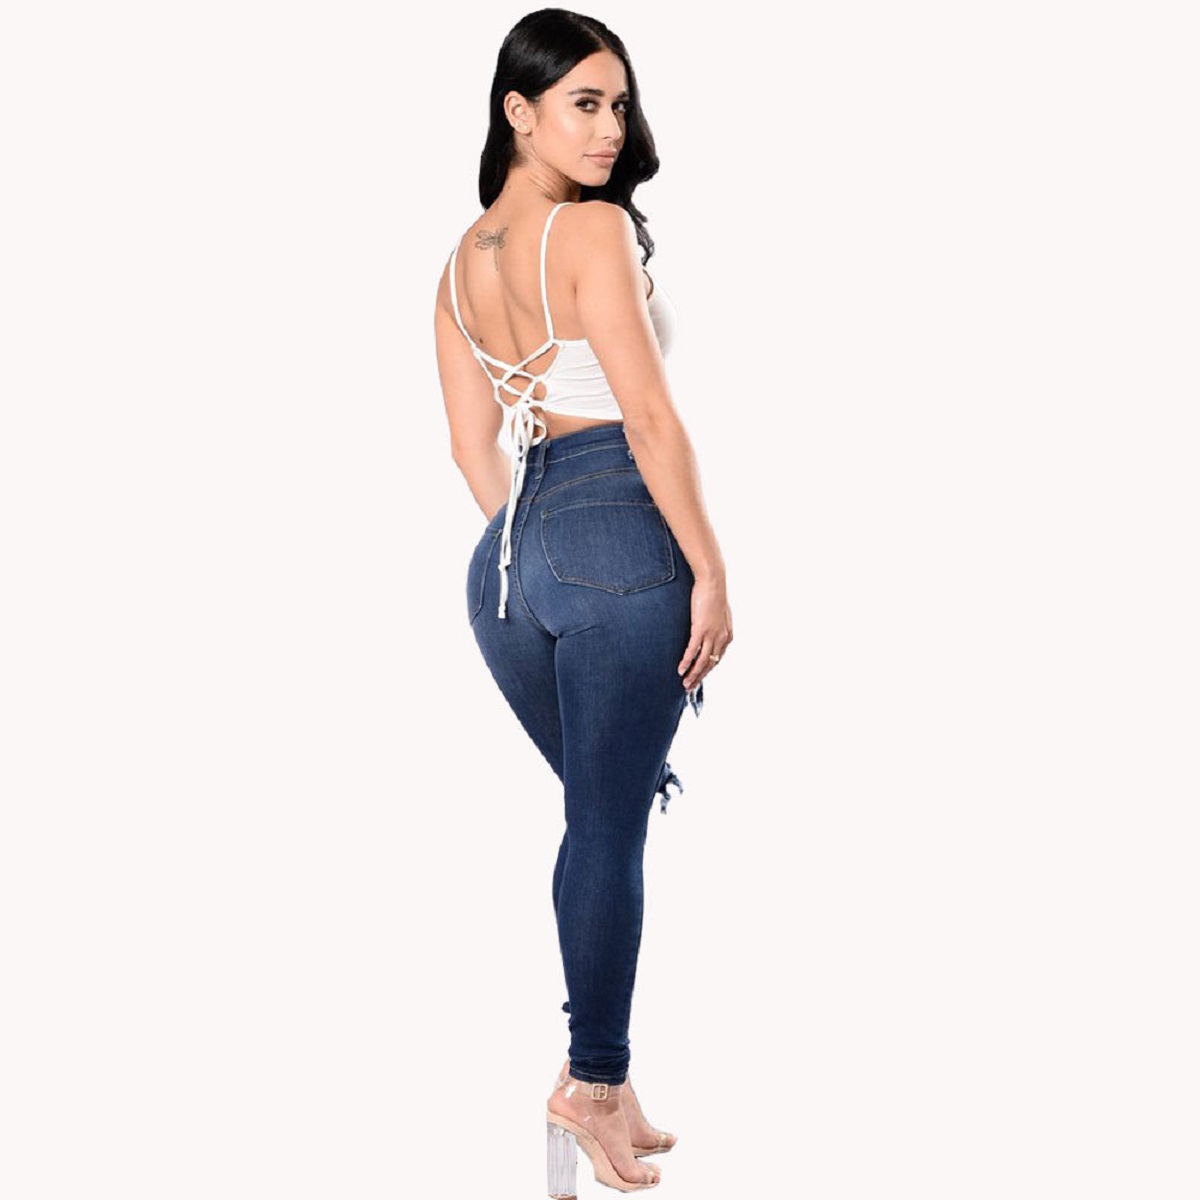 High Rise Tight Fitting Distressed Jeans, Blue Jeans ripped stretch denim tight fit 